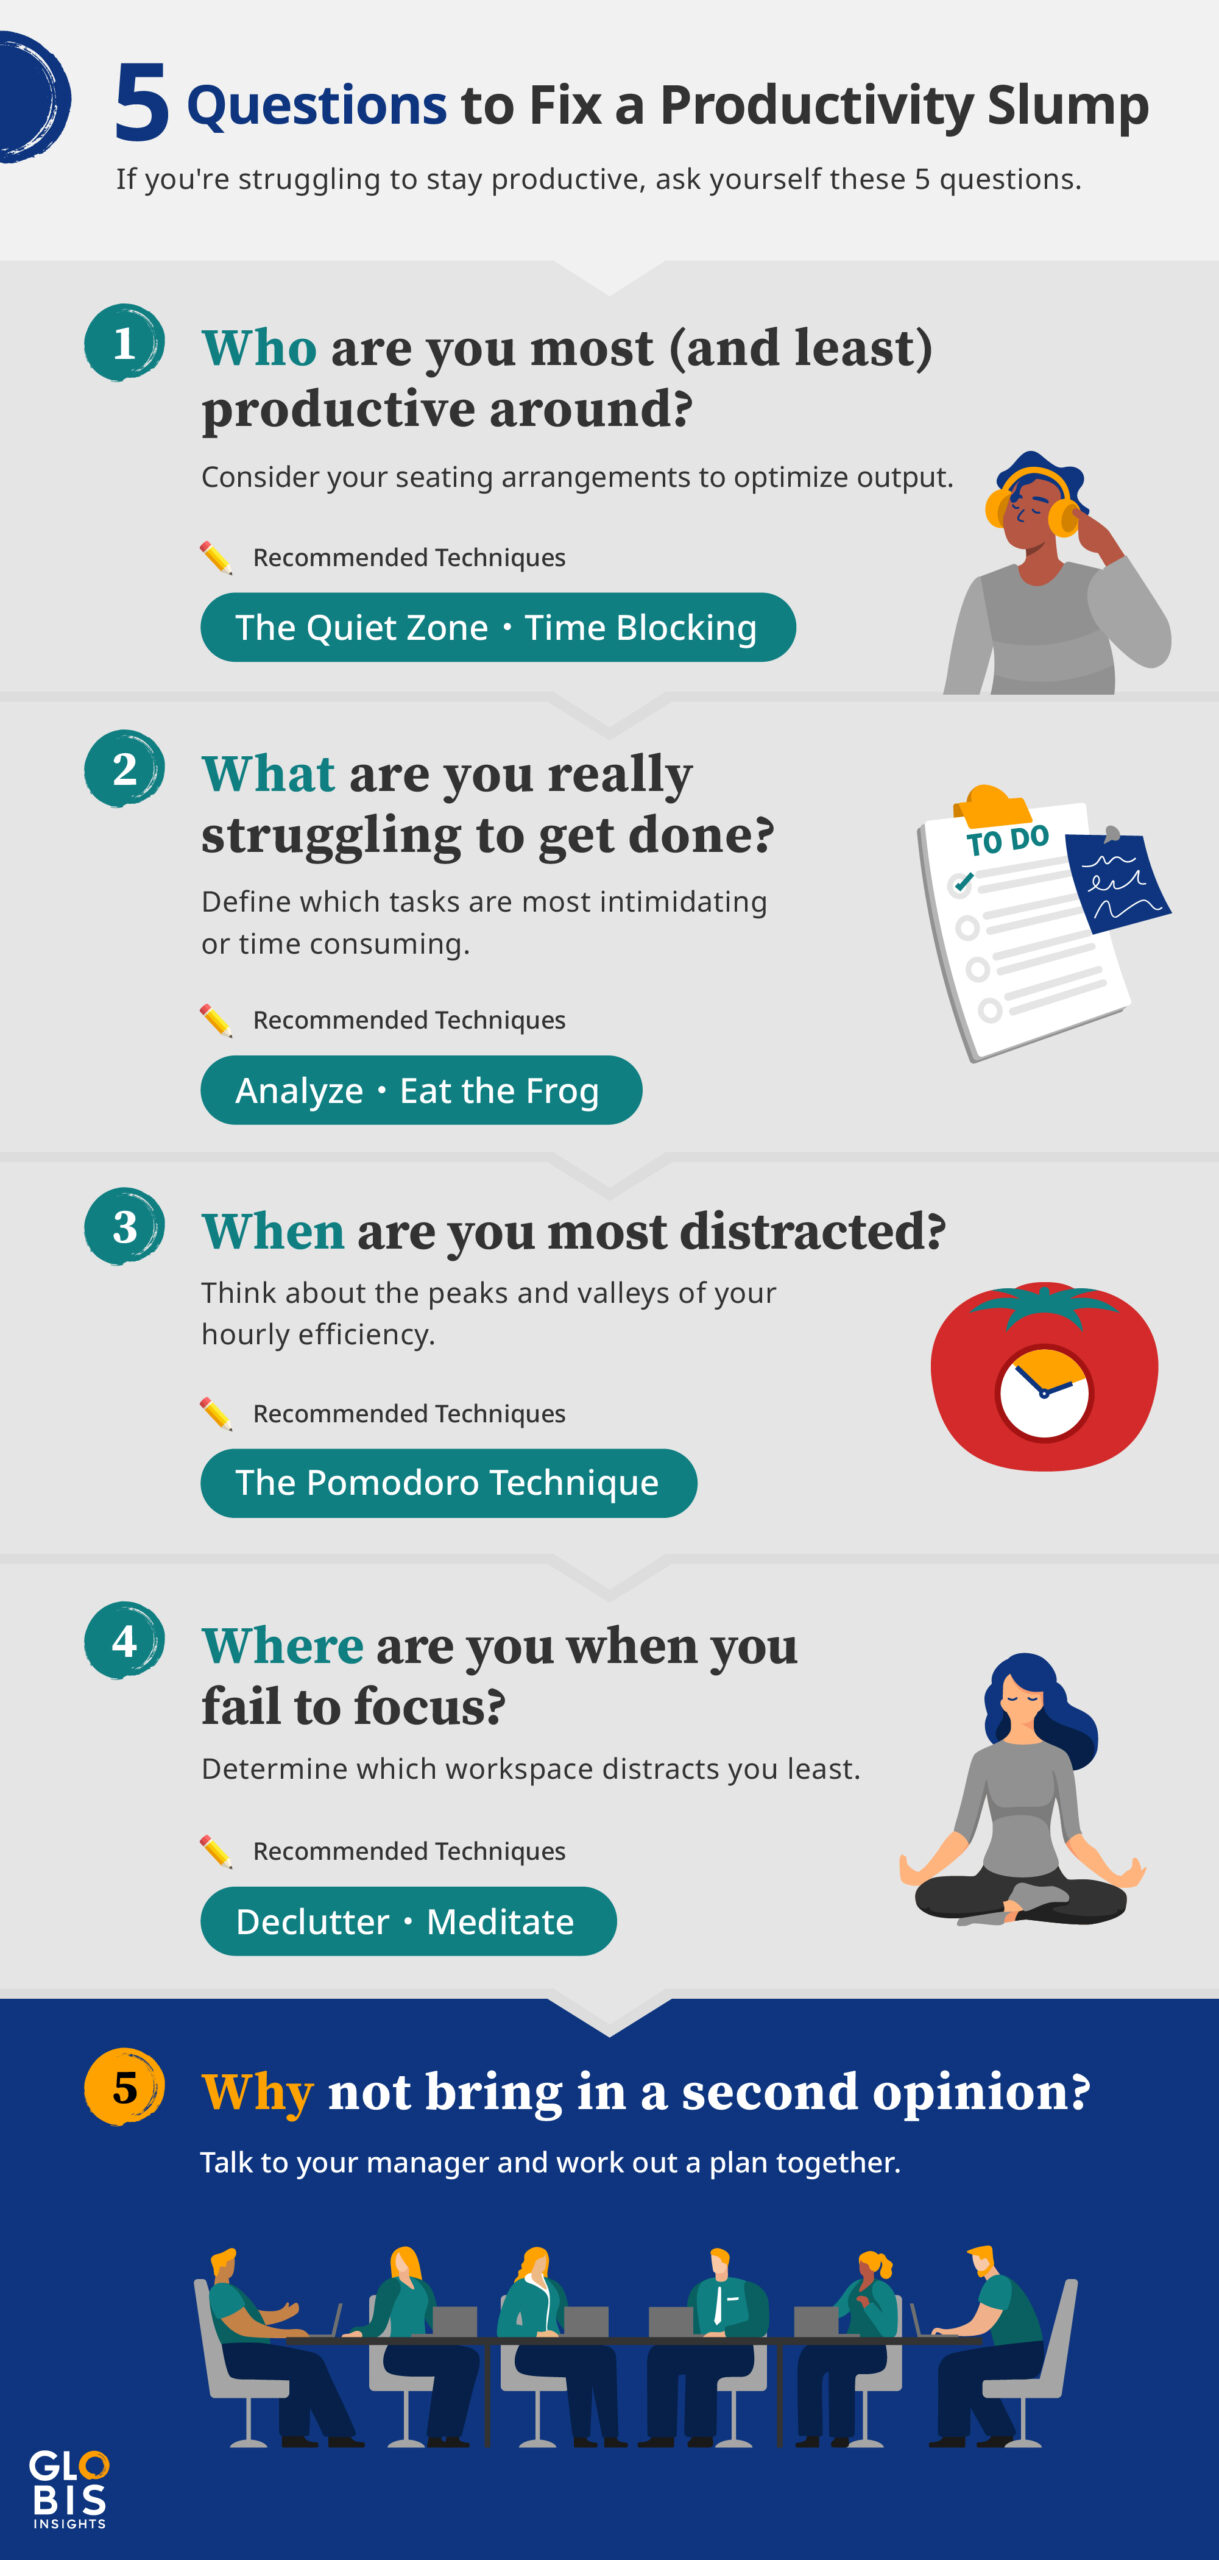 Infographic of 5 questions to address a productivity slump, each followed by productivity tips